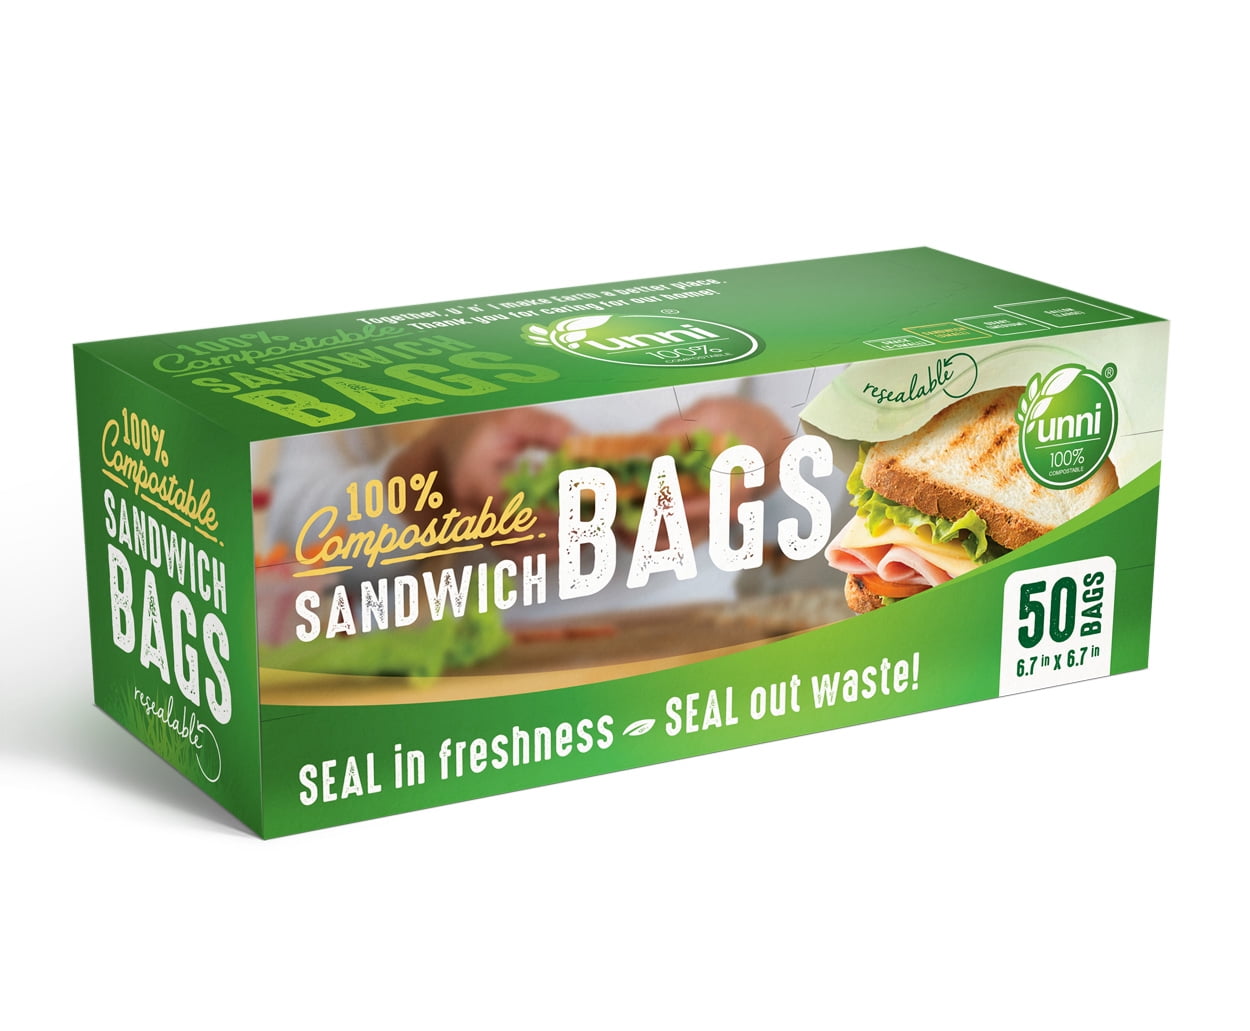  Complete Bags kit 5-Pack Variety,52 Storage Gallon Bags, 38  Freezer Gallon Bags, 54 Freezer Quart Bags, 145 Sandwich Bags, and 120  Snack Bags,410 Total Package Quantity,Niro Assortment